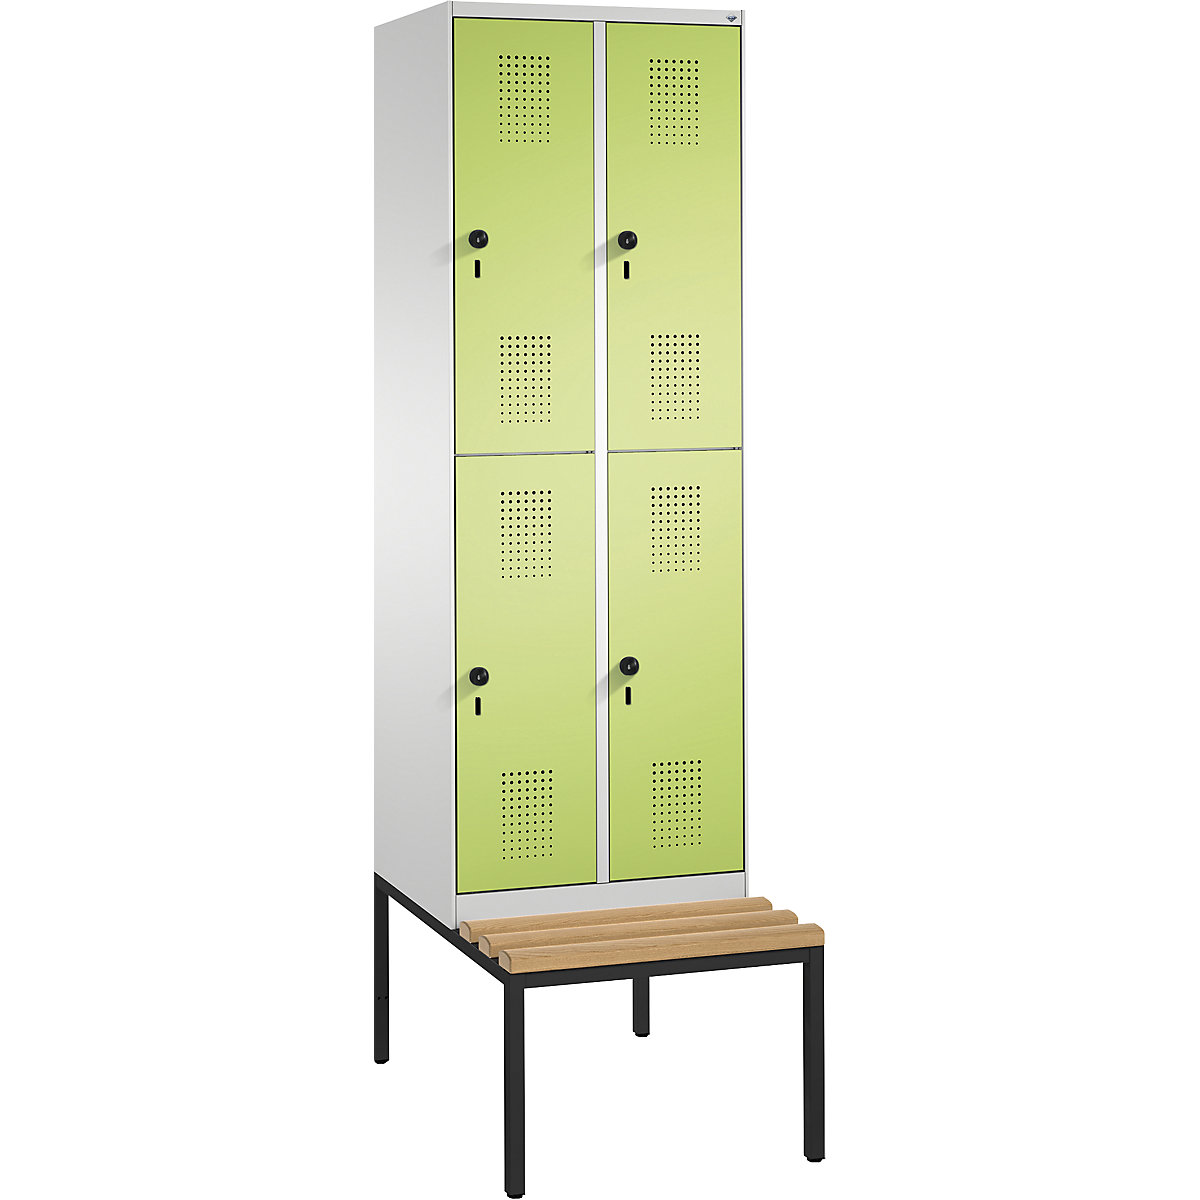 EVOLO cloakroom locker, double tier, with bench – C+P, 2 compartments, 2 shelf compartments each, compartment width 300 mm, light grey / viridian green-9